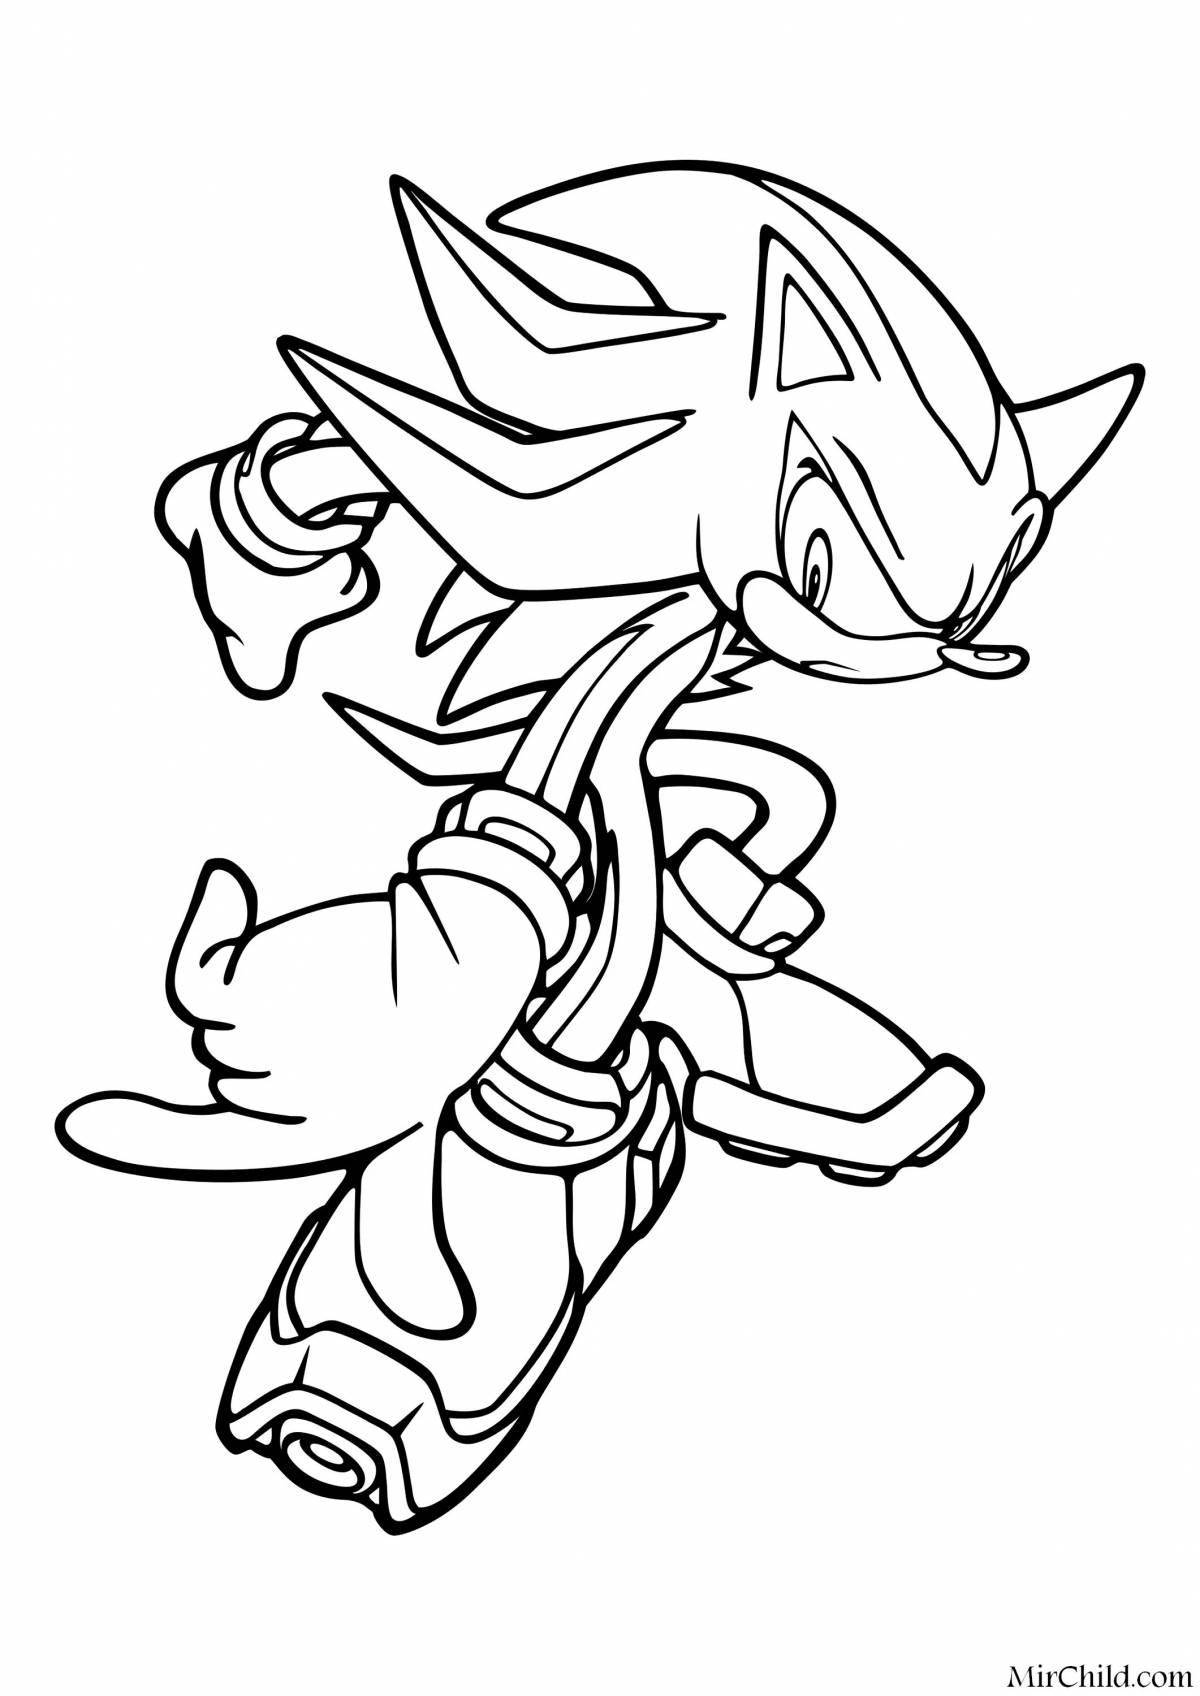 Great darkspine sonic coloring book